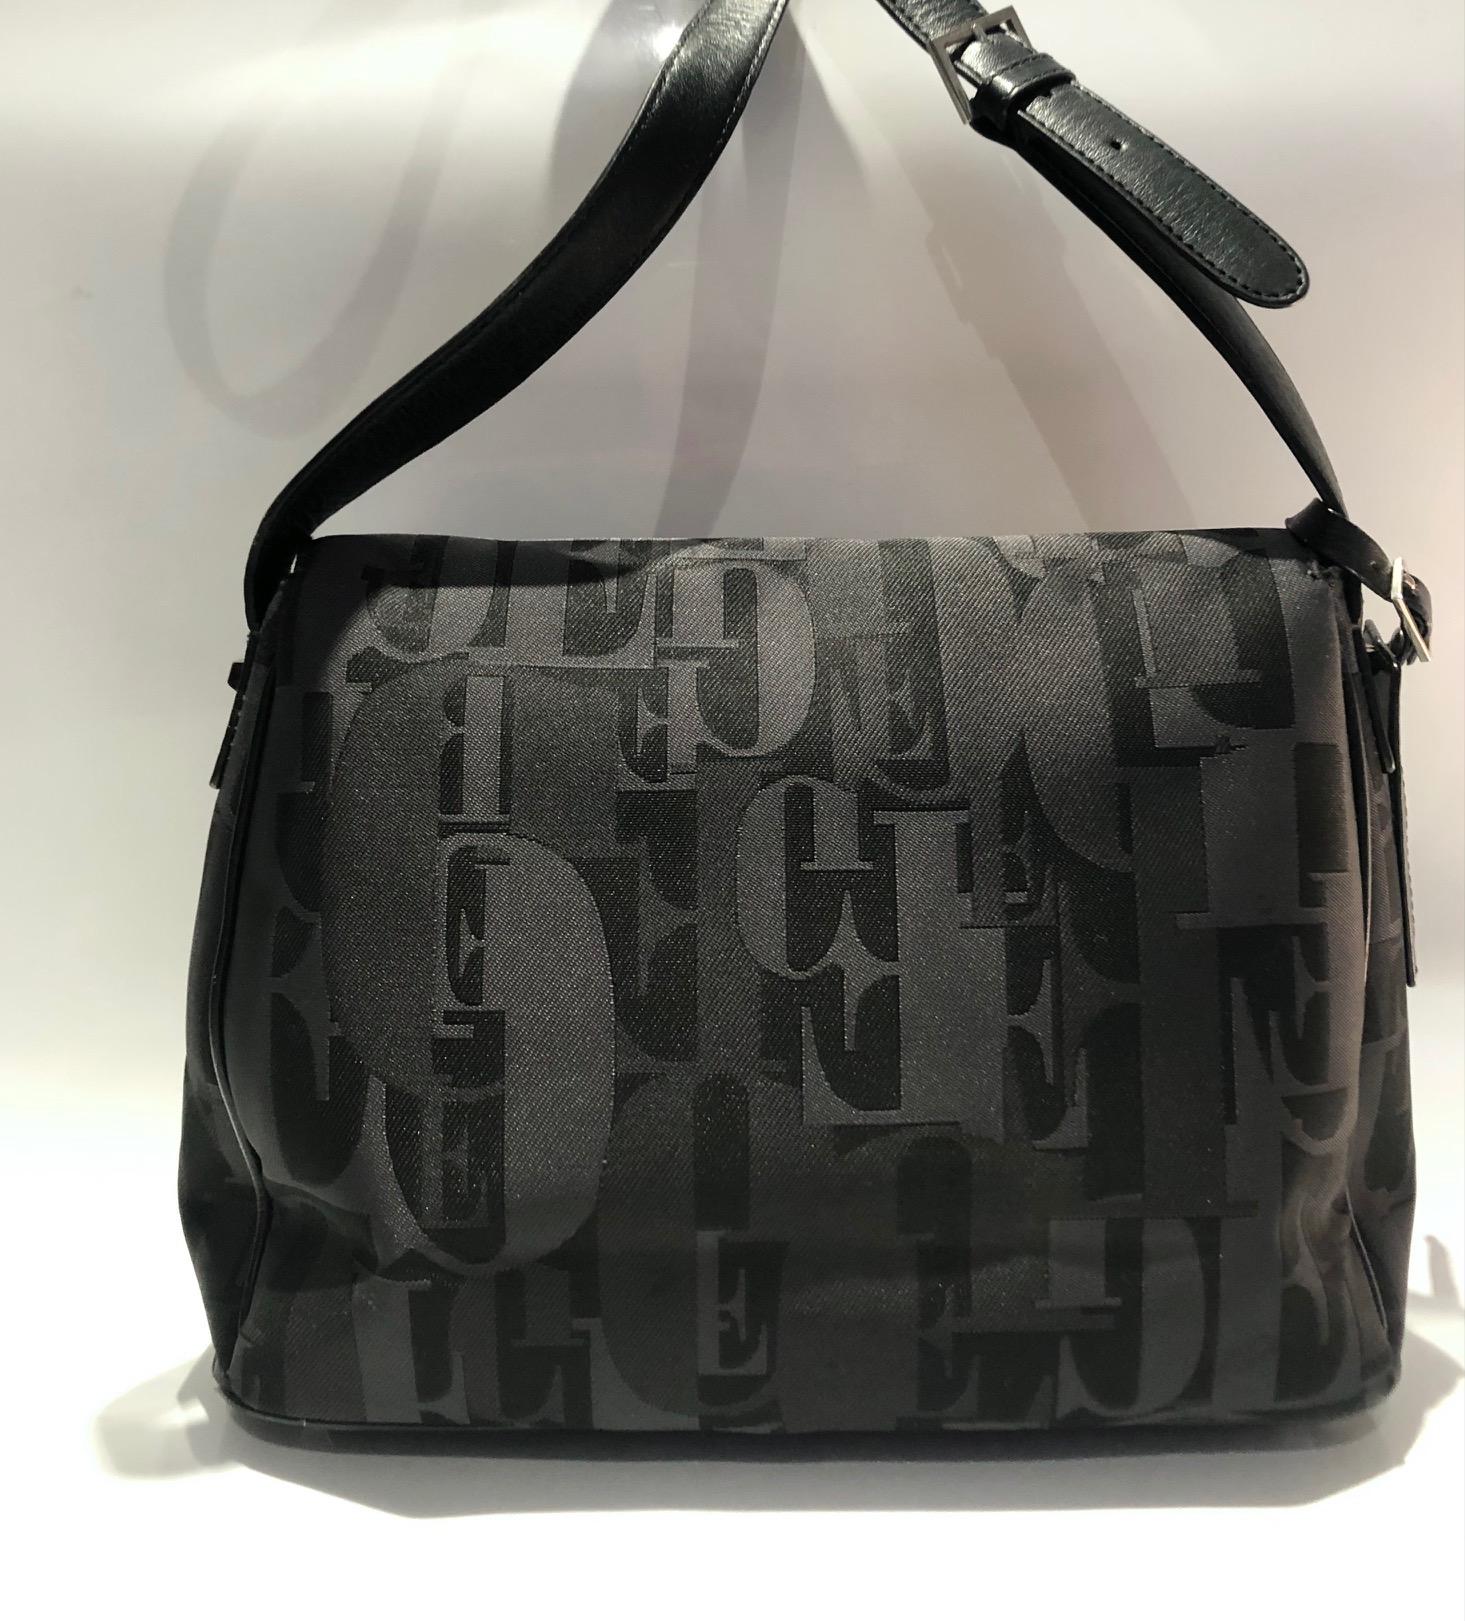 Black Gianfranco Ferre Logo Print Shoulder Crossbody bag, waterproof fabric, internal zipped pocket, 2 additional open compartments. The cross body strap is fully adjustable and in black leather Logo tag

Measurements: approximately 11.5” wide and